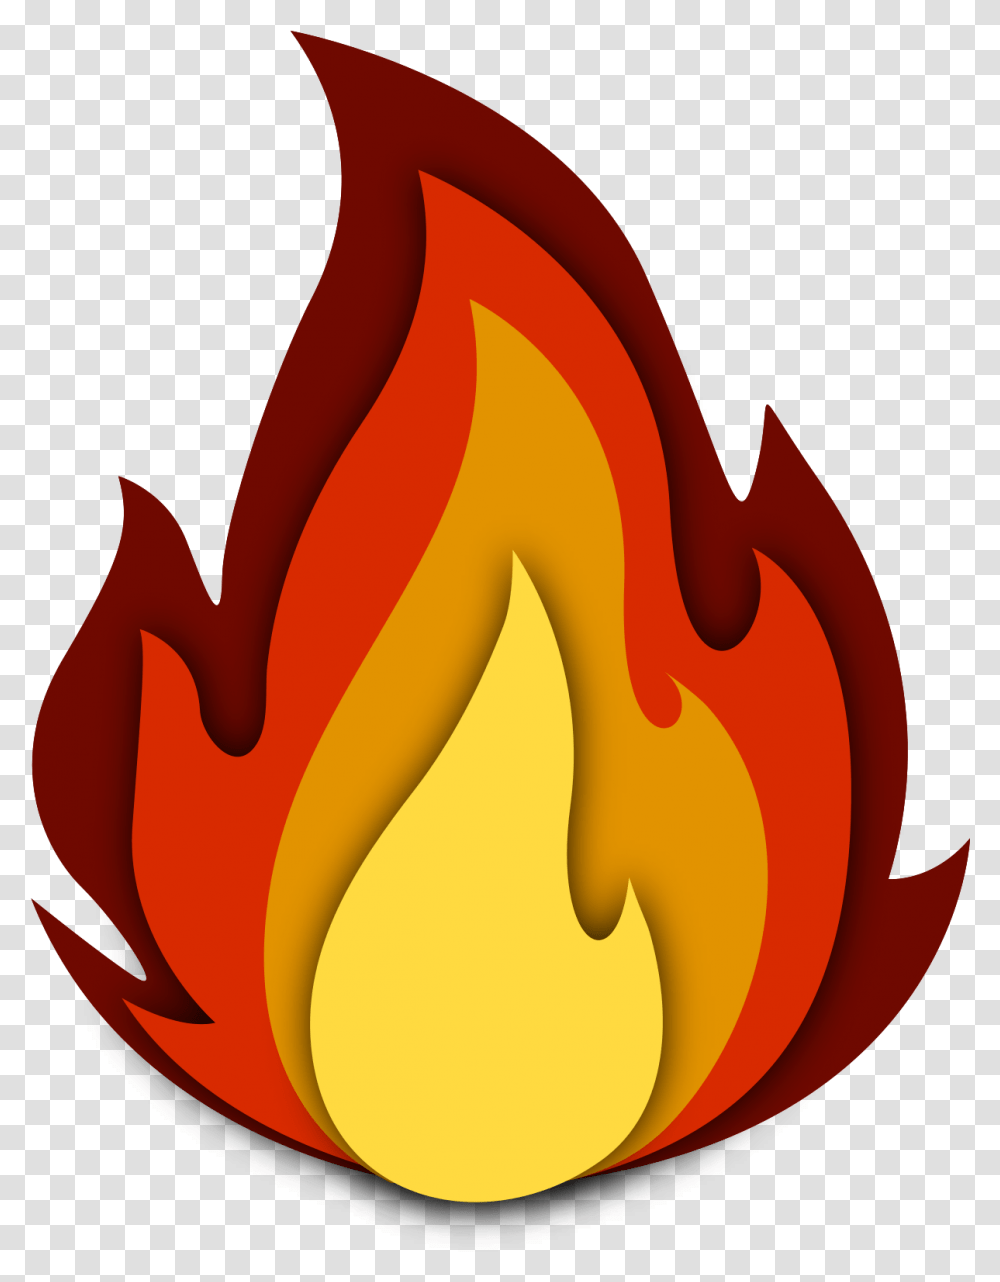 Free Fire With Background Fire Emoji, Flame, Bonfire Transparent Png